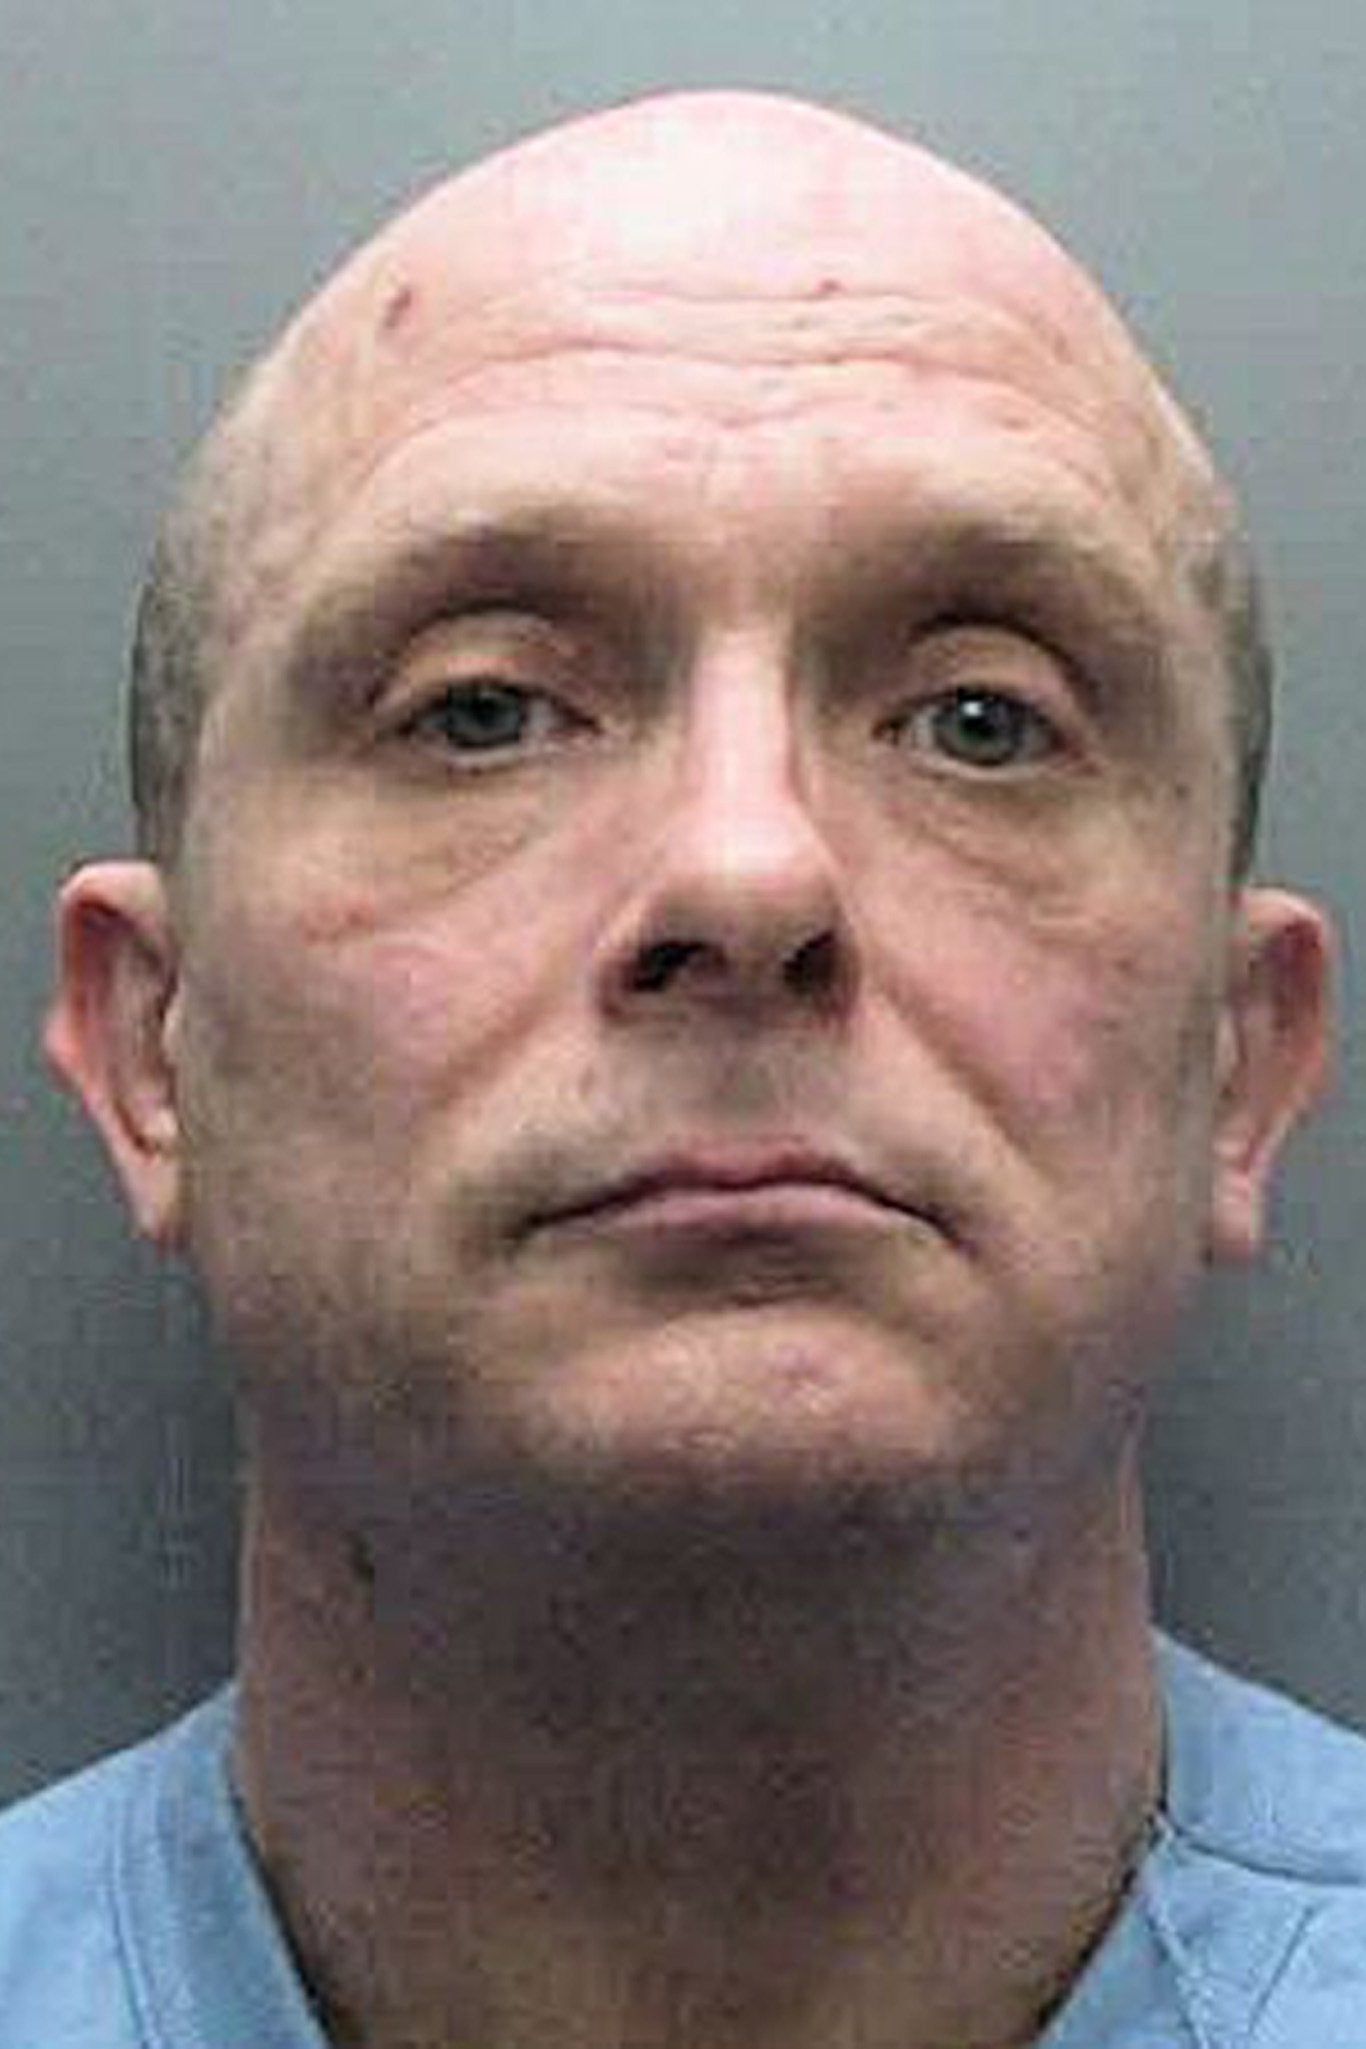 Russell Bishop has been described as one of the most dangerous paedophiles in Britain